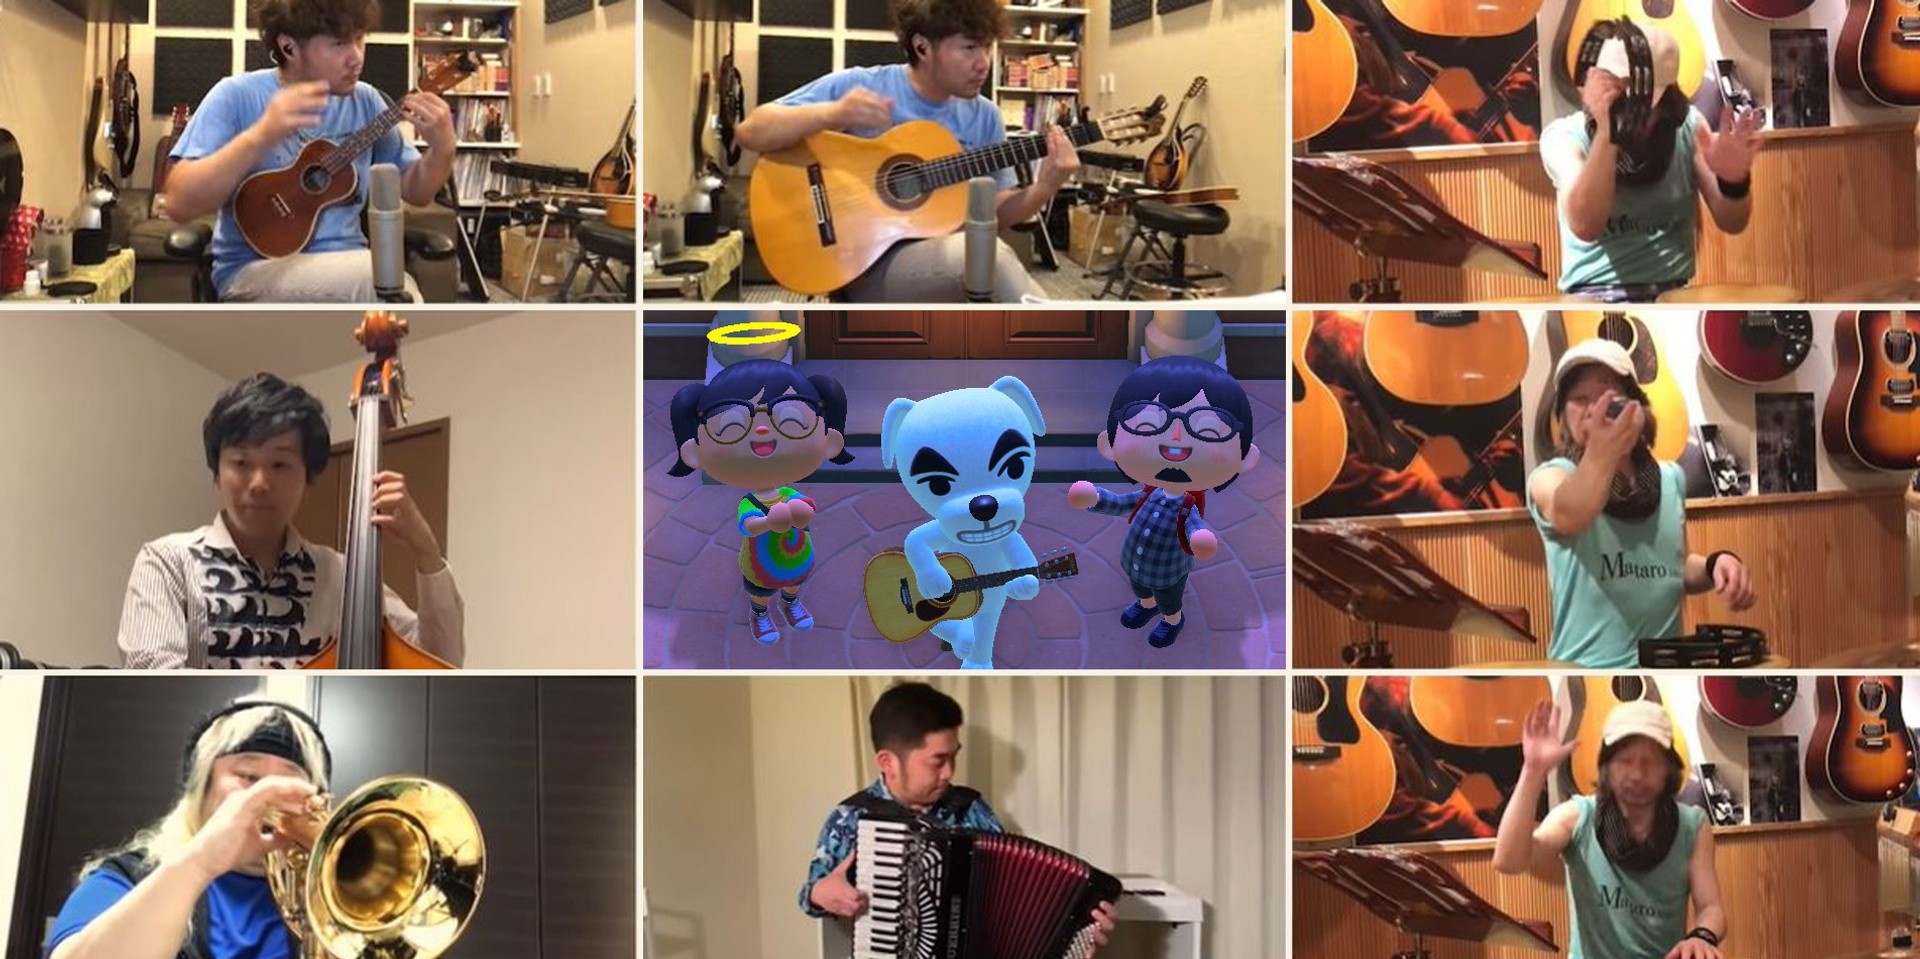 Nintendo shares soothing live performance video of the Animal Crossing: New Horizons theme – watch